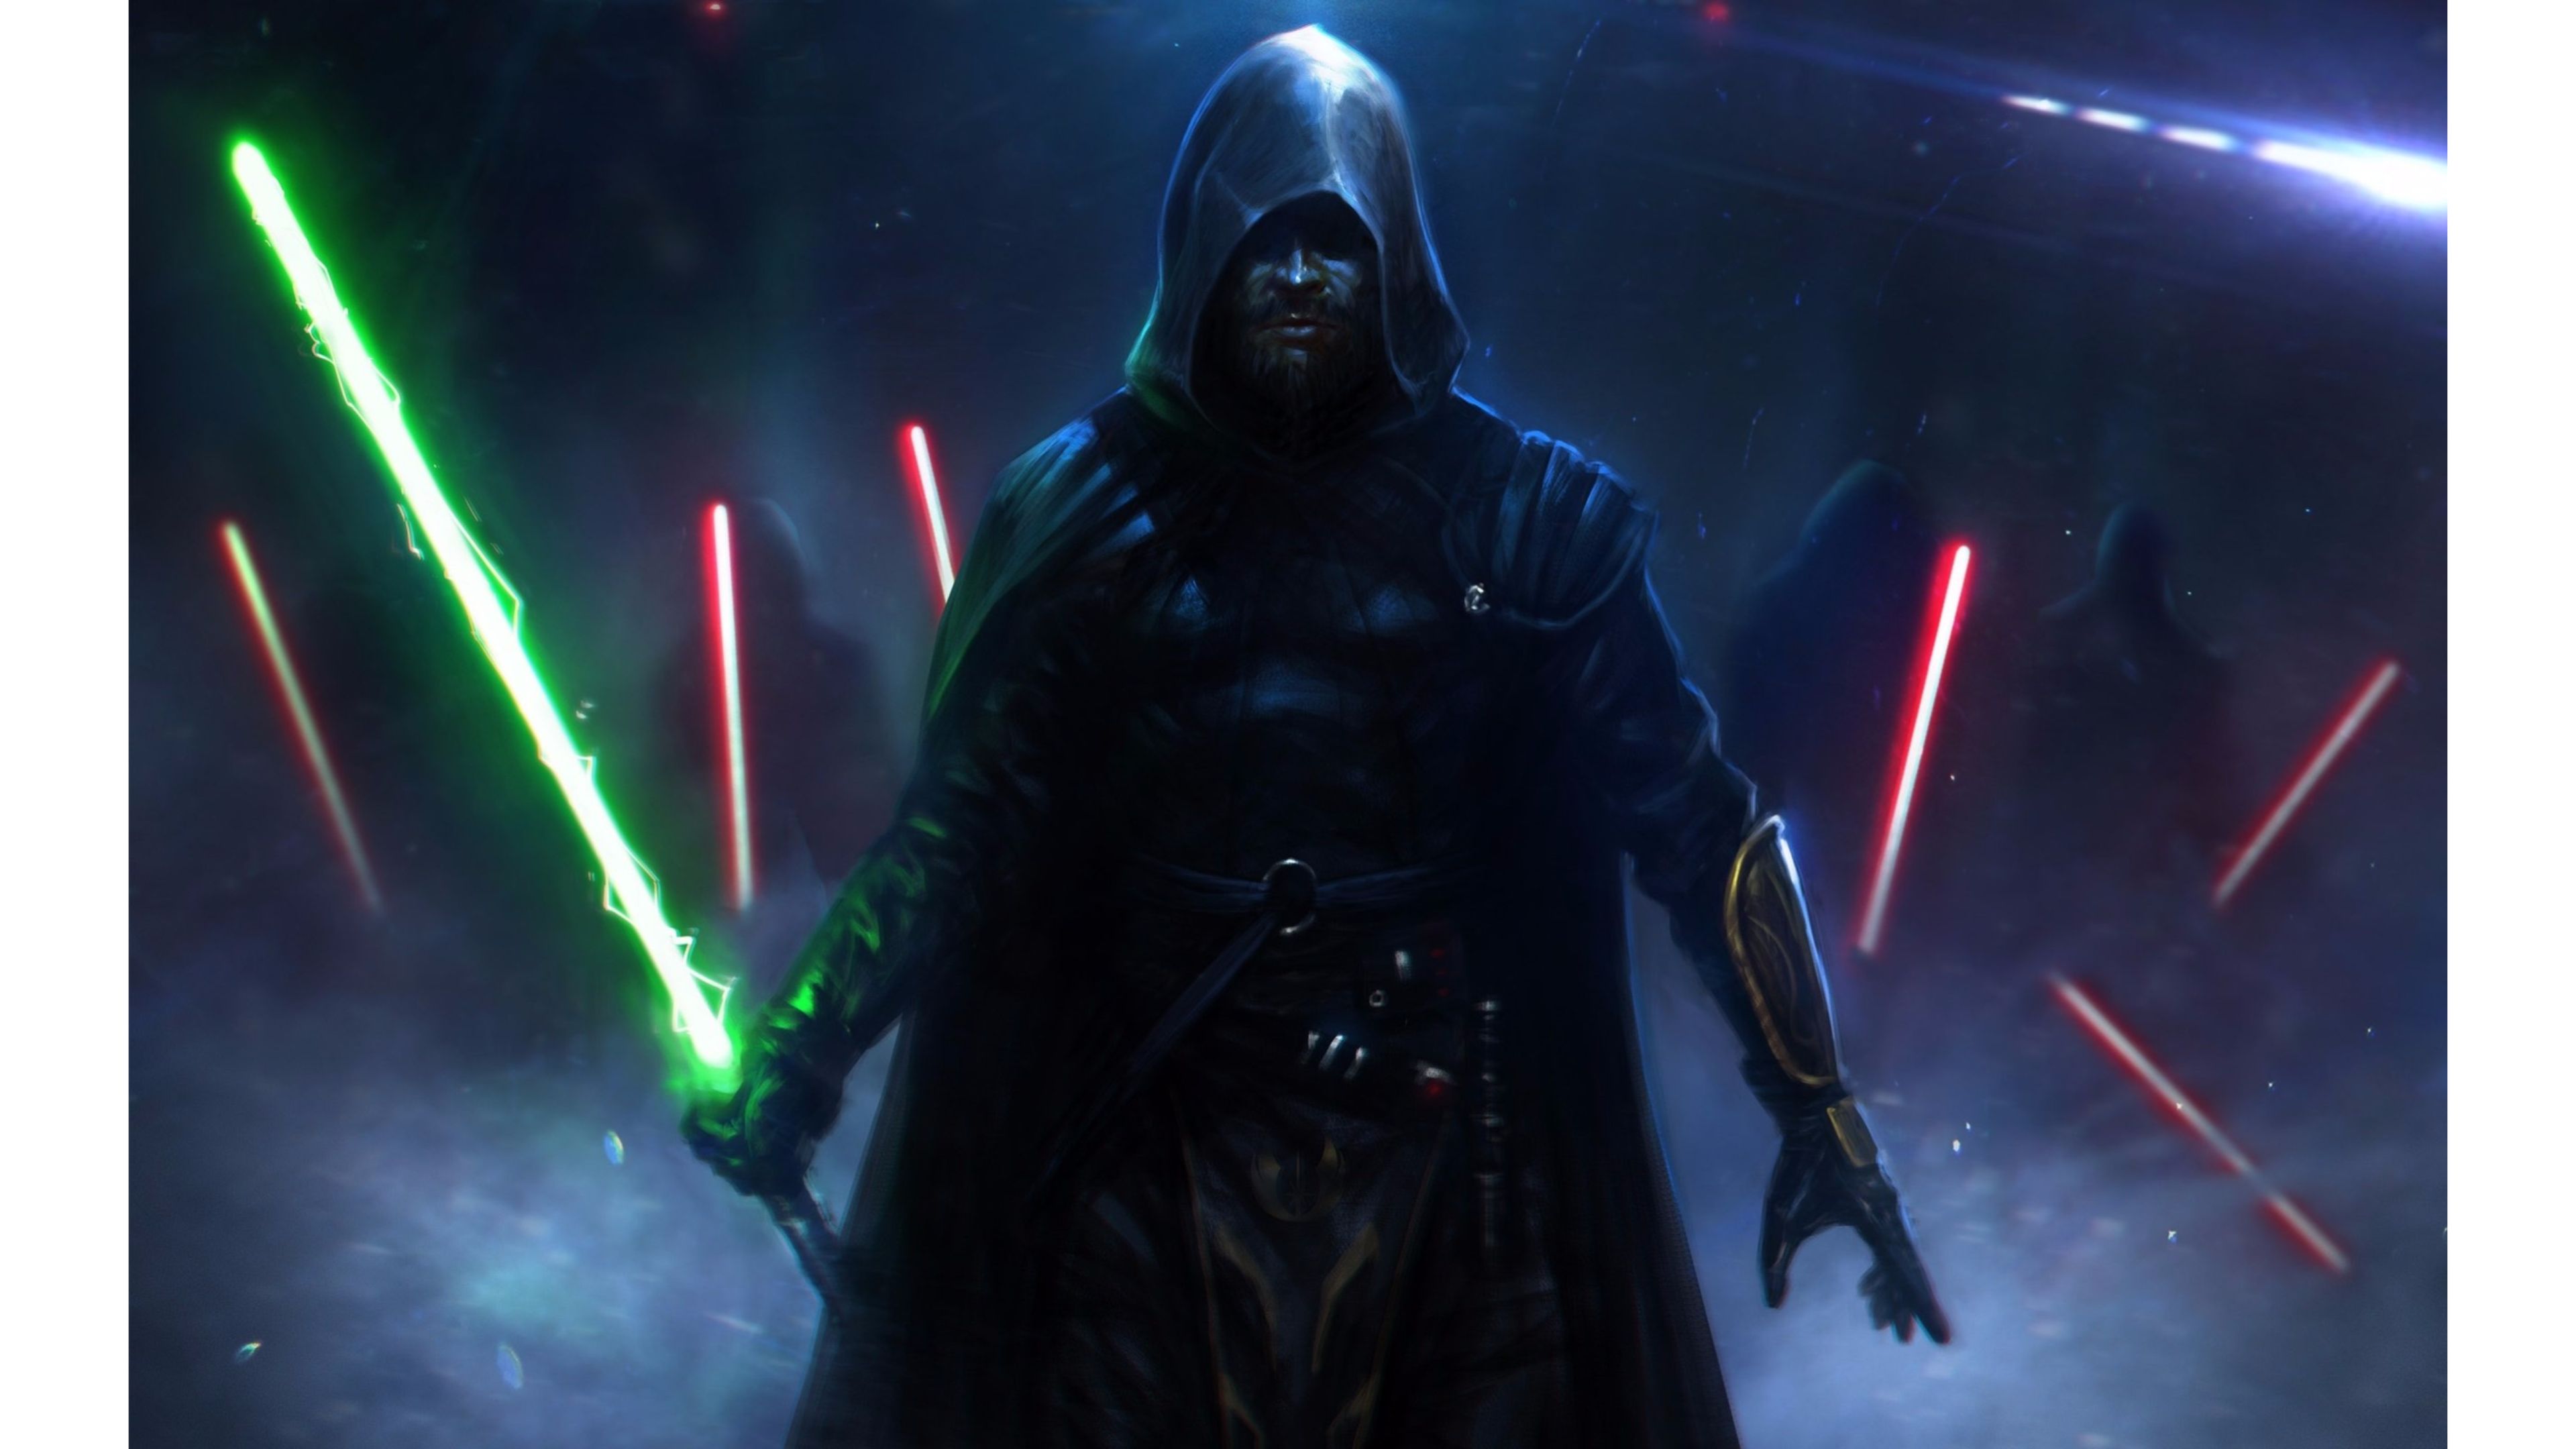 Lightsaber 4K wallpaper for your desktop or mobile screen free and easy to download